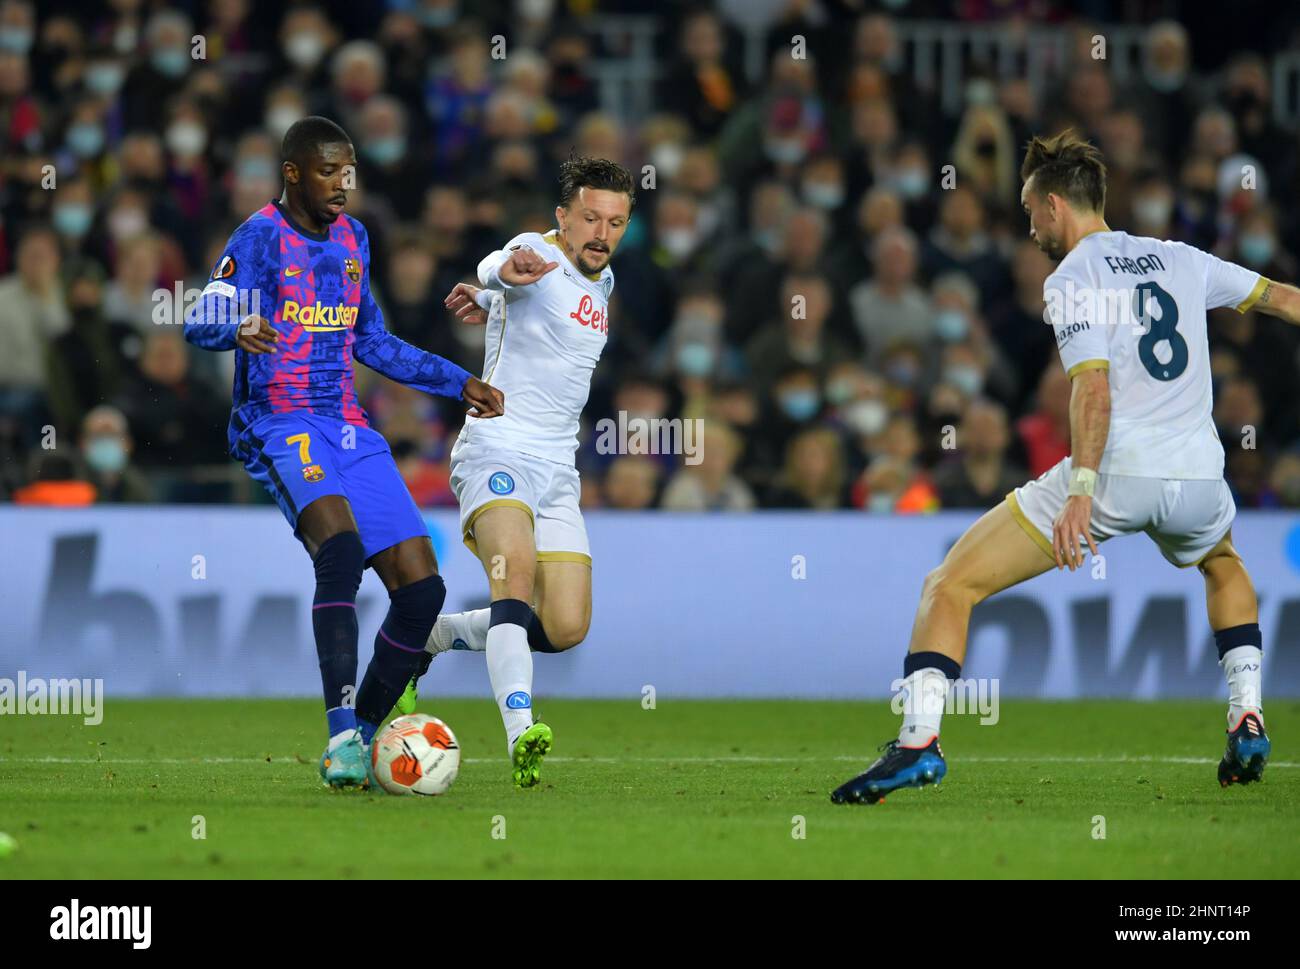 Barcelona,Spain.17 February,2022. Ousmane Dembele (7) of FC Barcelona  dribbles (06) Mario Rui of Napoli and (08) Fabian Ruiz of Napoli during the Europa  League match between FC Barcelona and SSC Napoli at